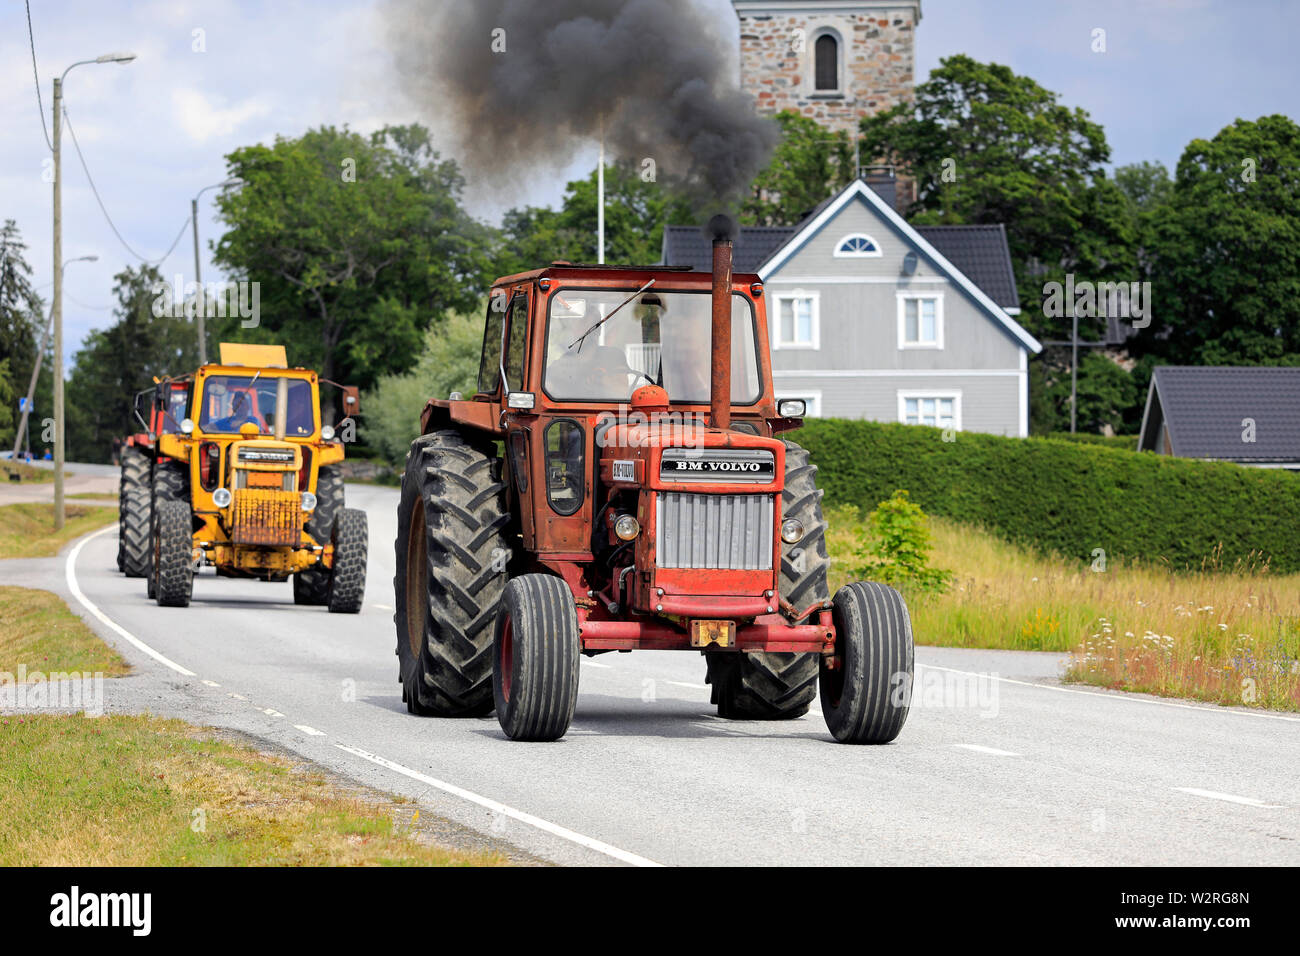 Kimito, Finland. July 6, 2019. Volvo BM tractors, red 810 first, on Kimito Tractorkavalkad, annual tractor parade through the small town. Stock Photo